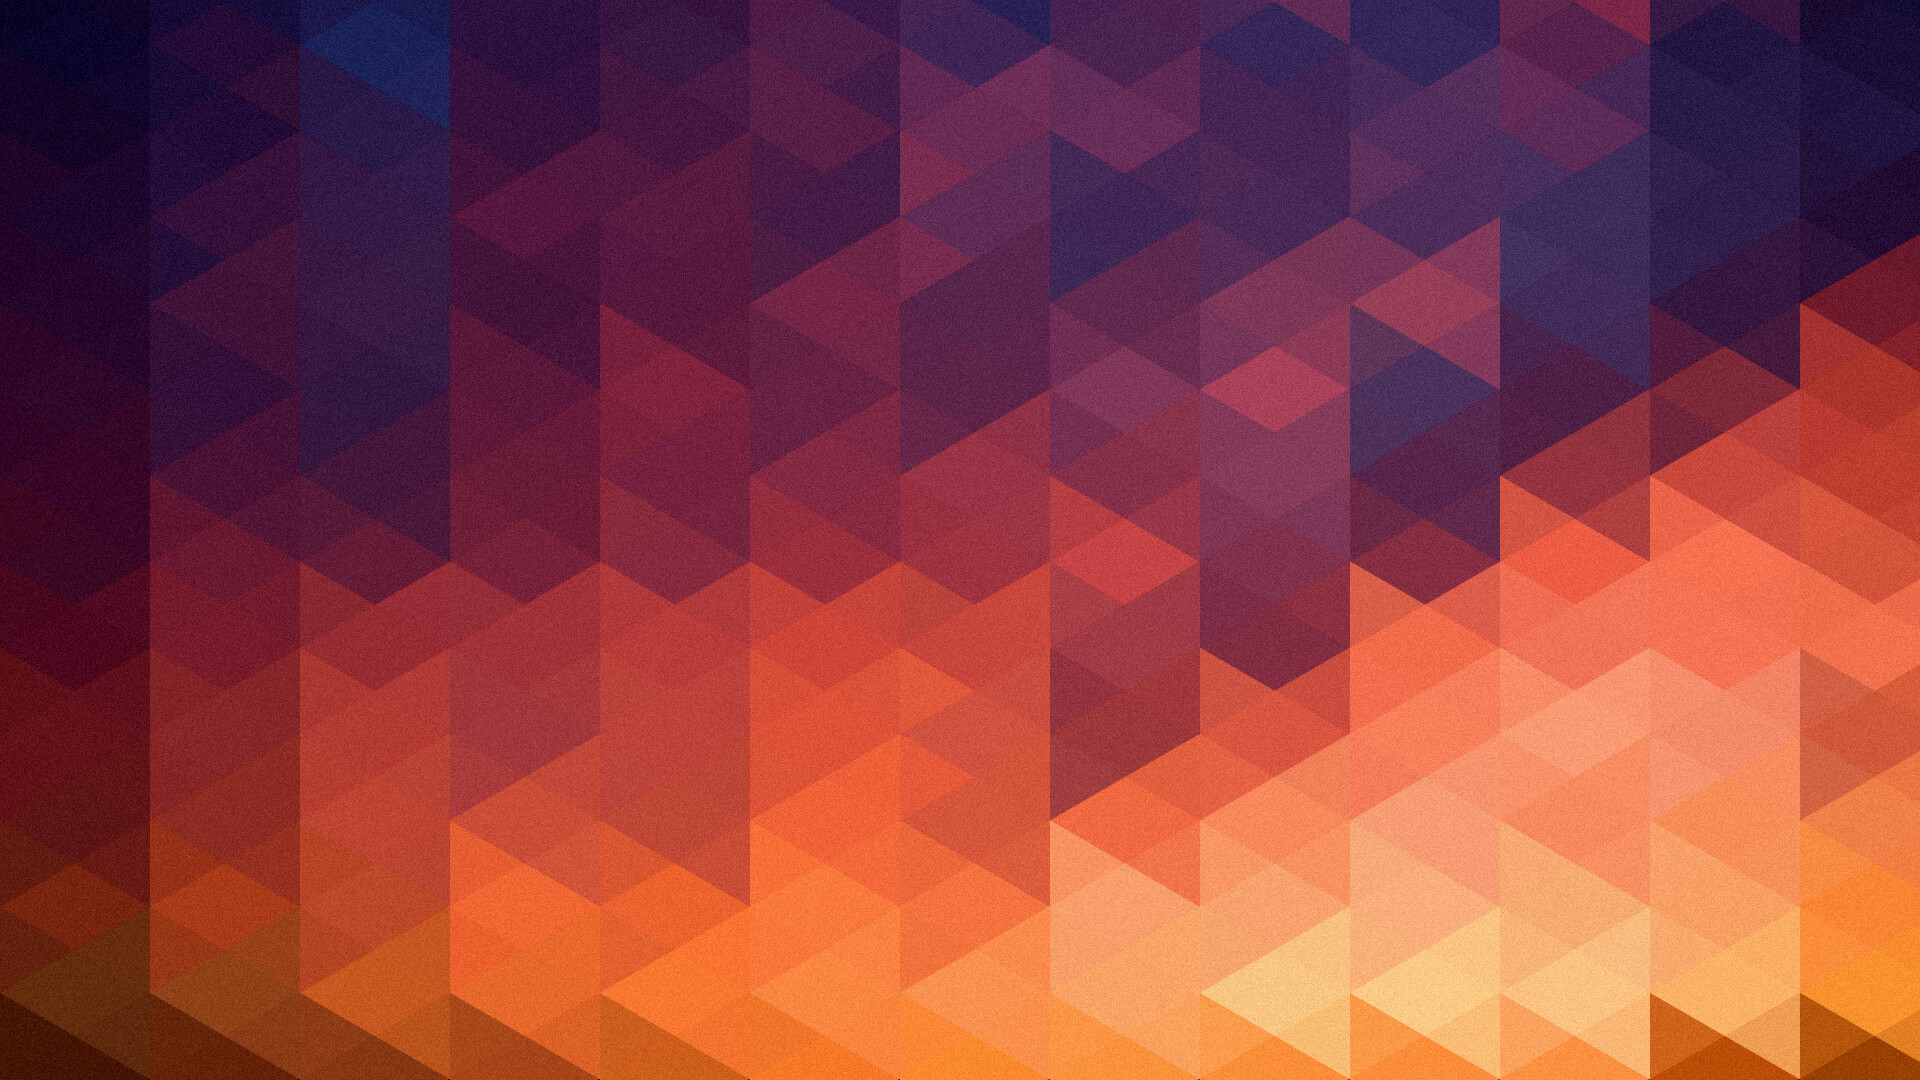 Geometric Abstract: Gradient, Rhombus, Triangles, Parallelograms. 1920x1080 Full HD Background.